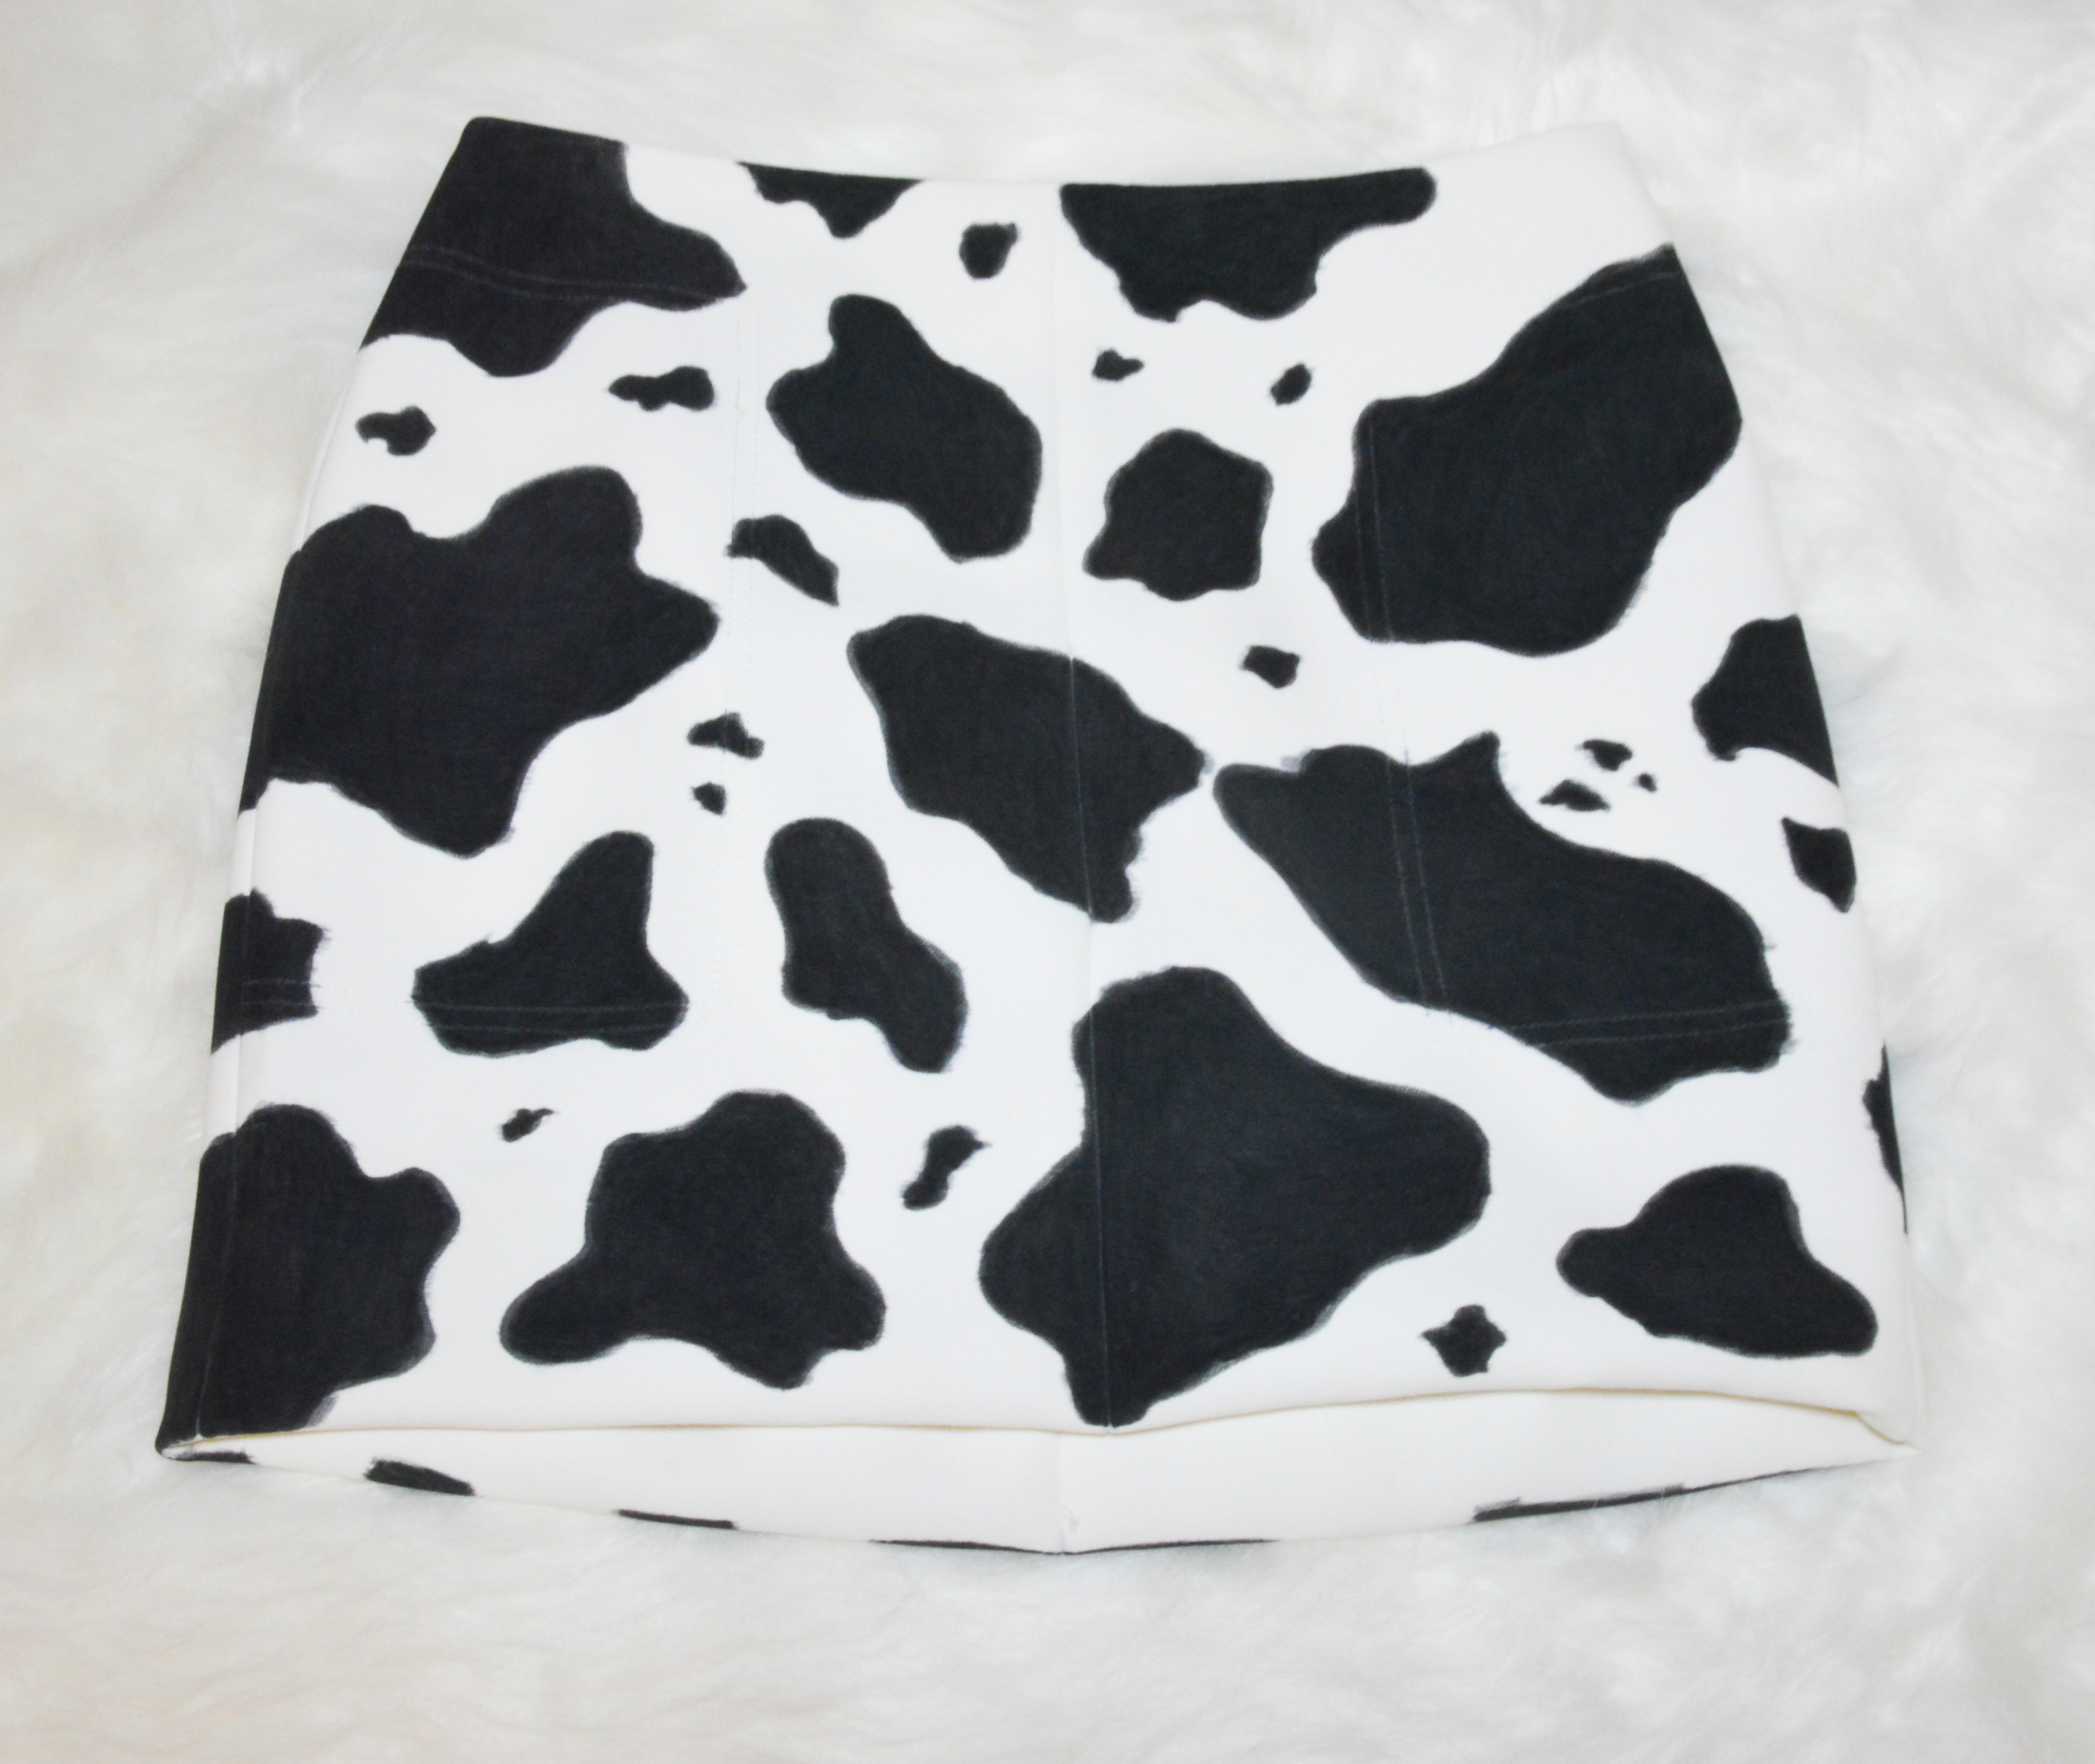 Cow print skirt DIY: Using fabric markers or paint - fashionpsychic